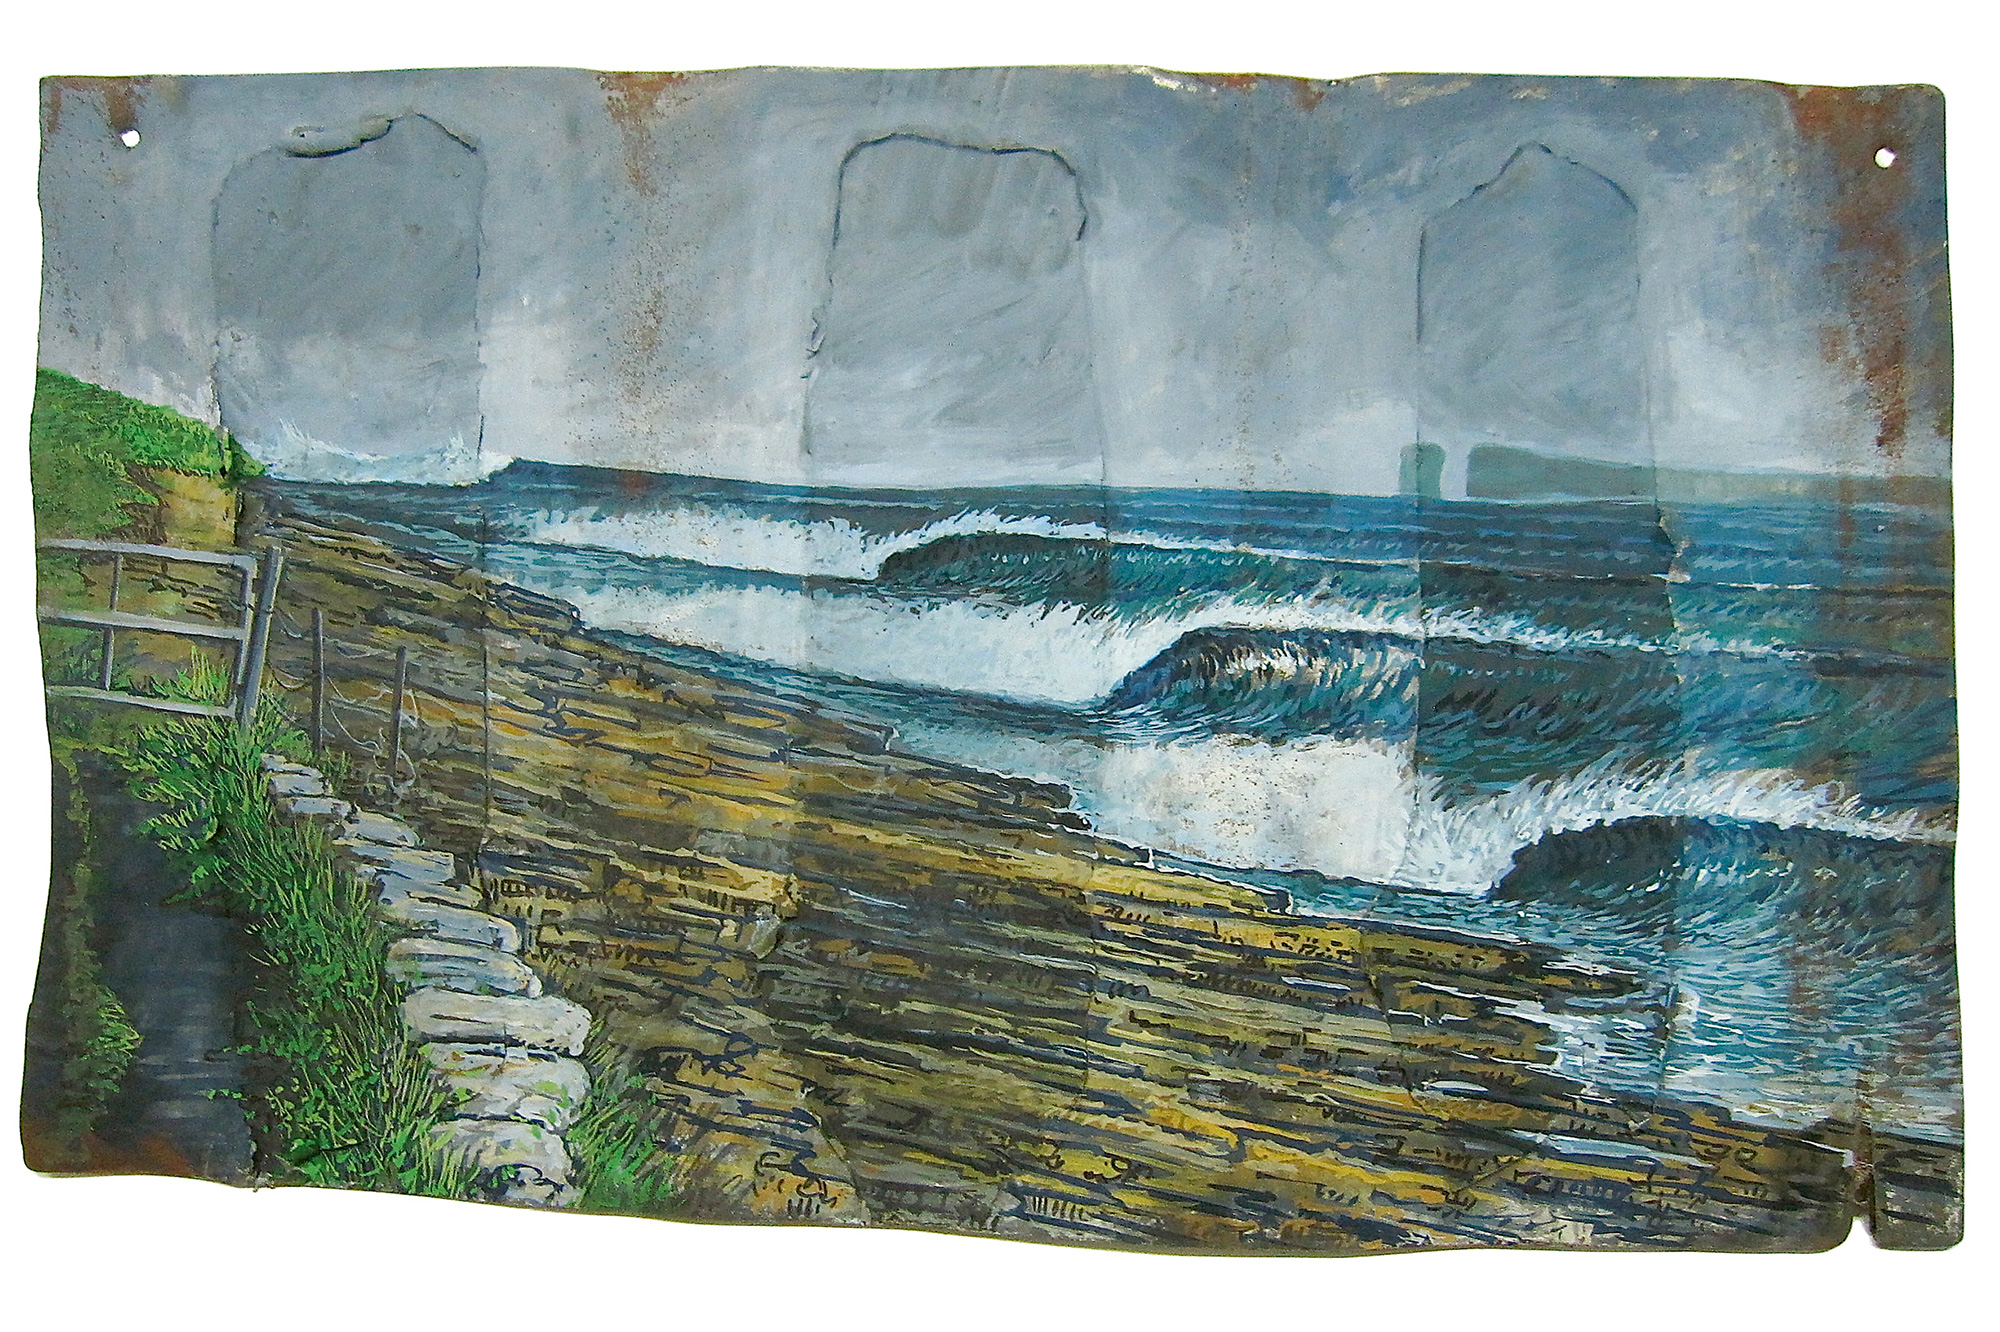 An artwork depicting a coast with large waves.